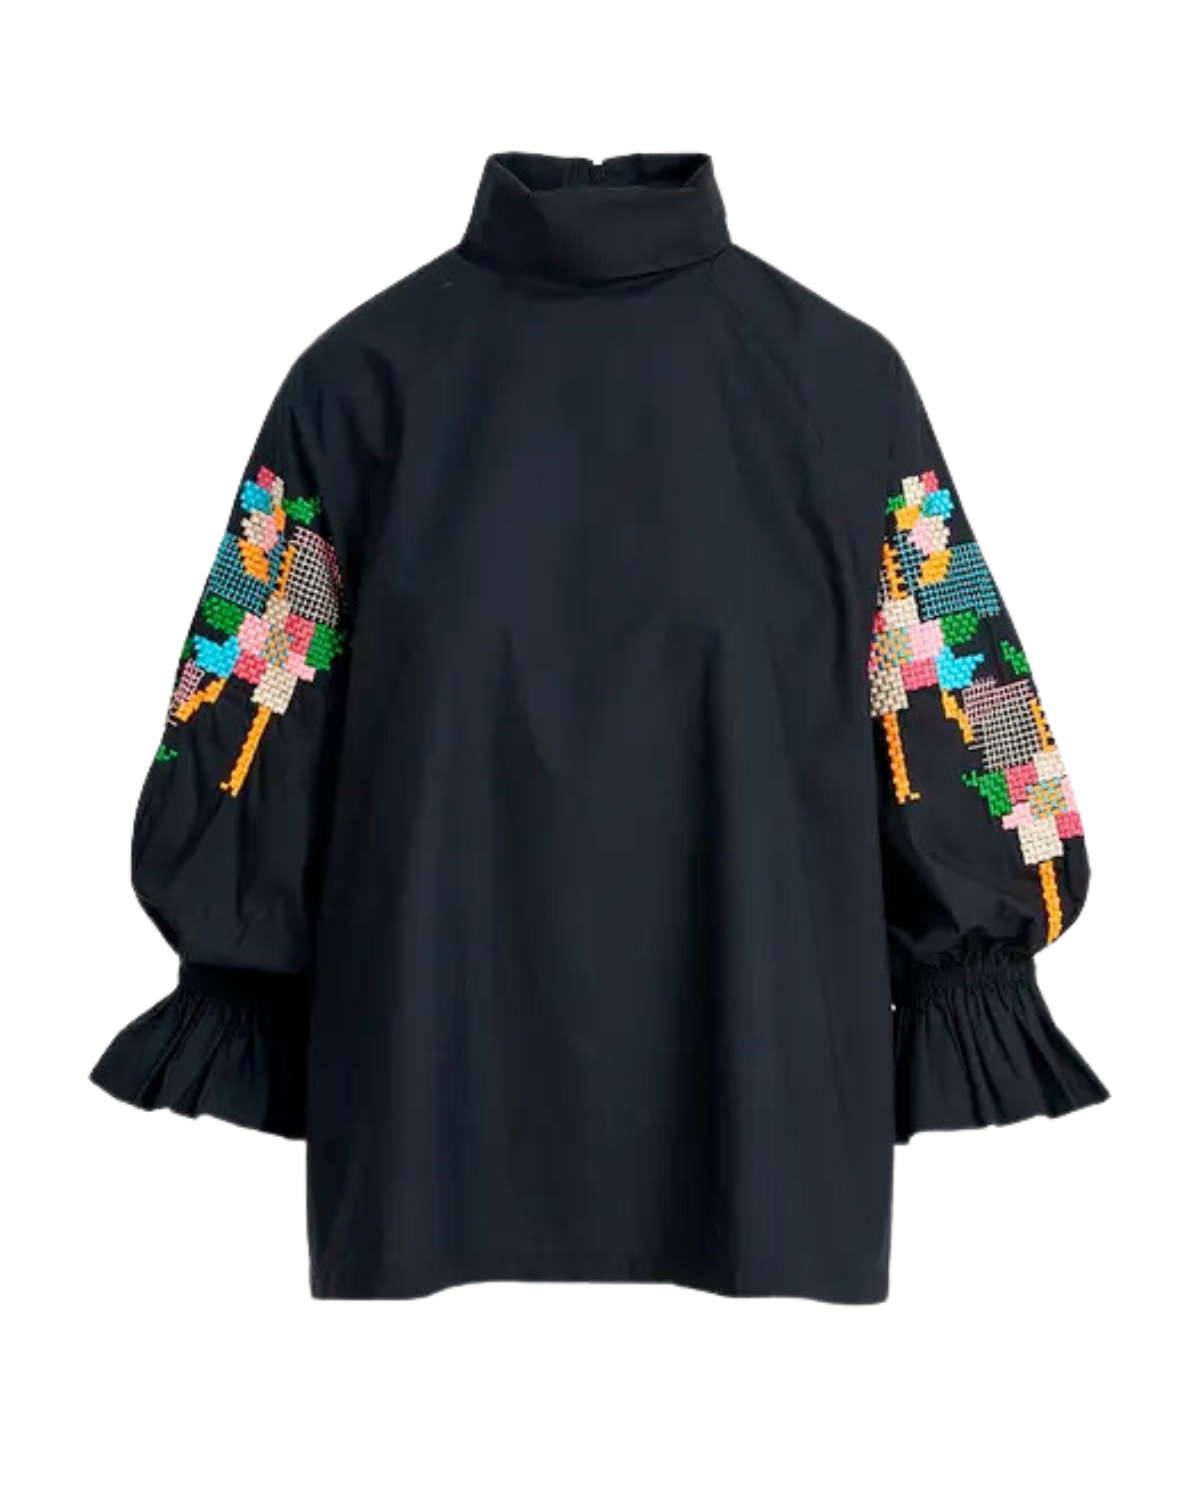 Eleanor Embroidered Sleeve Top (Black Combo)